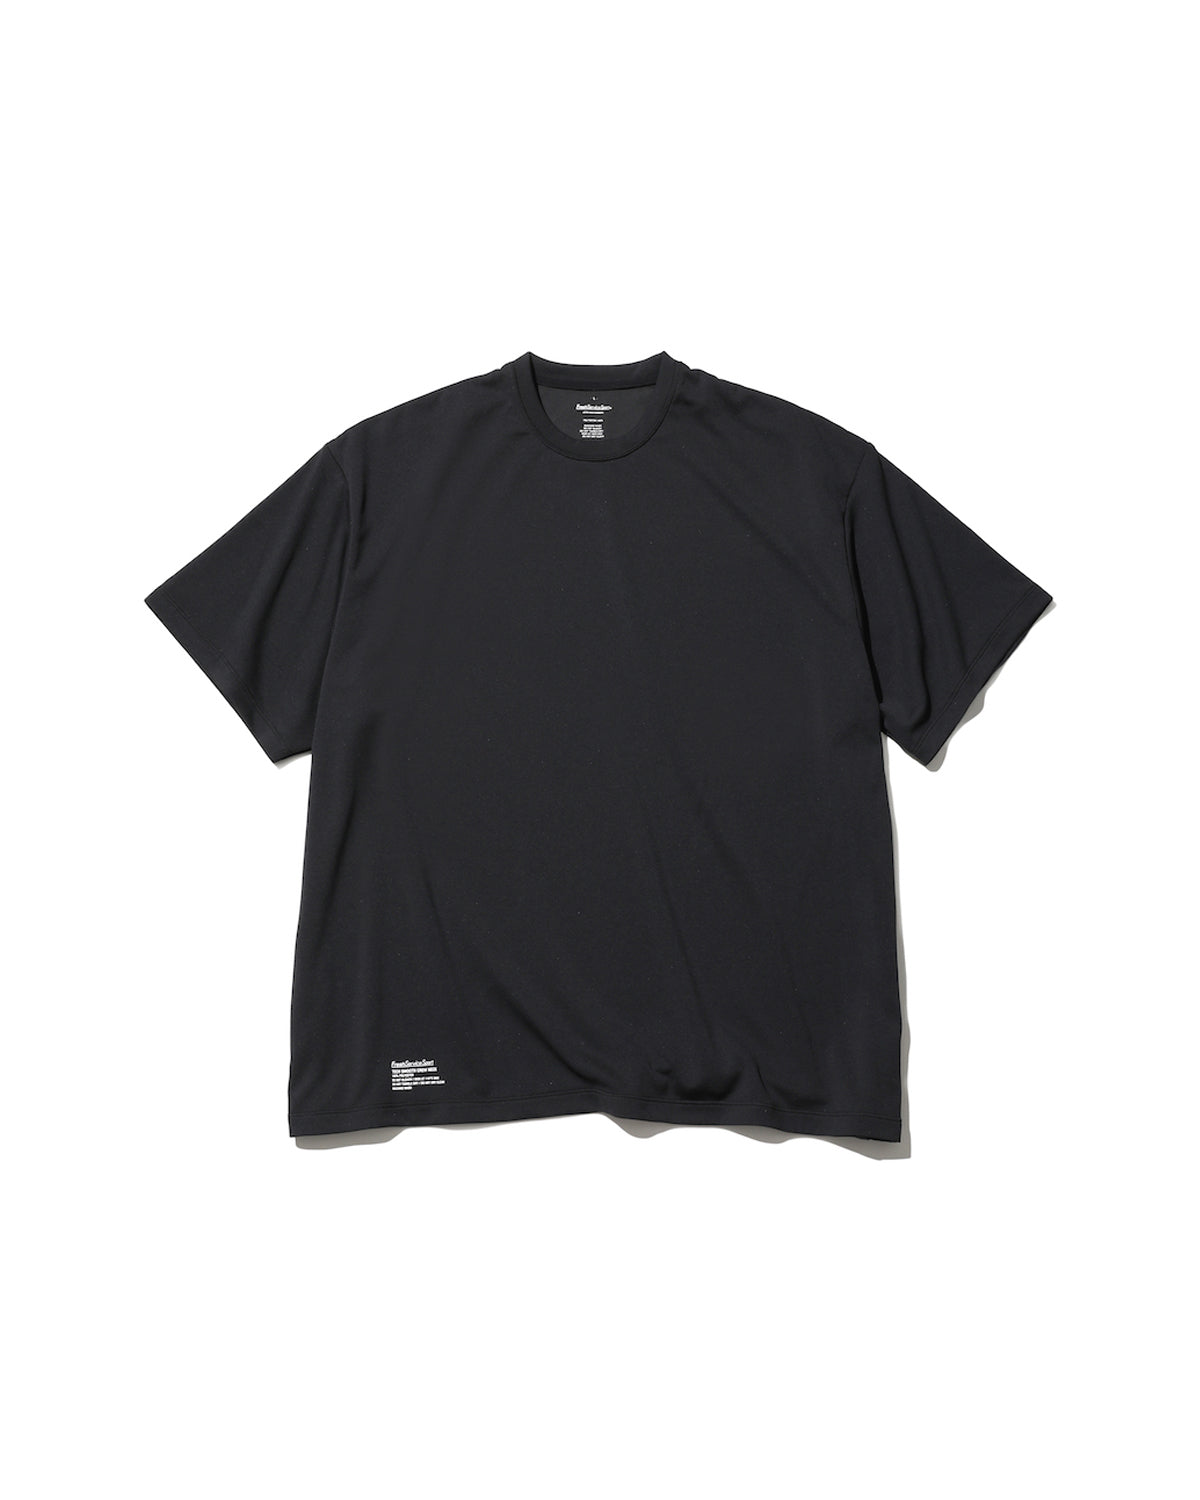 FreshService 2-PACK TECH SMOOTH CREW NECK